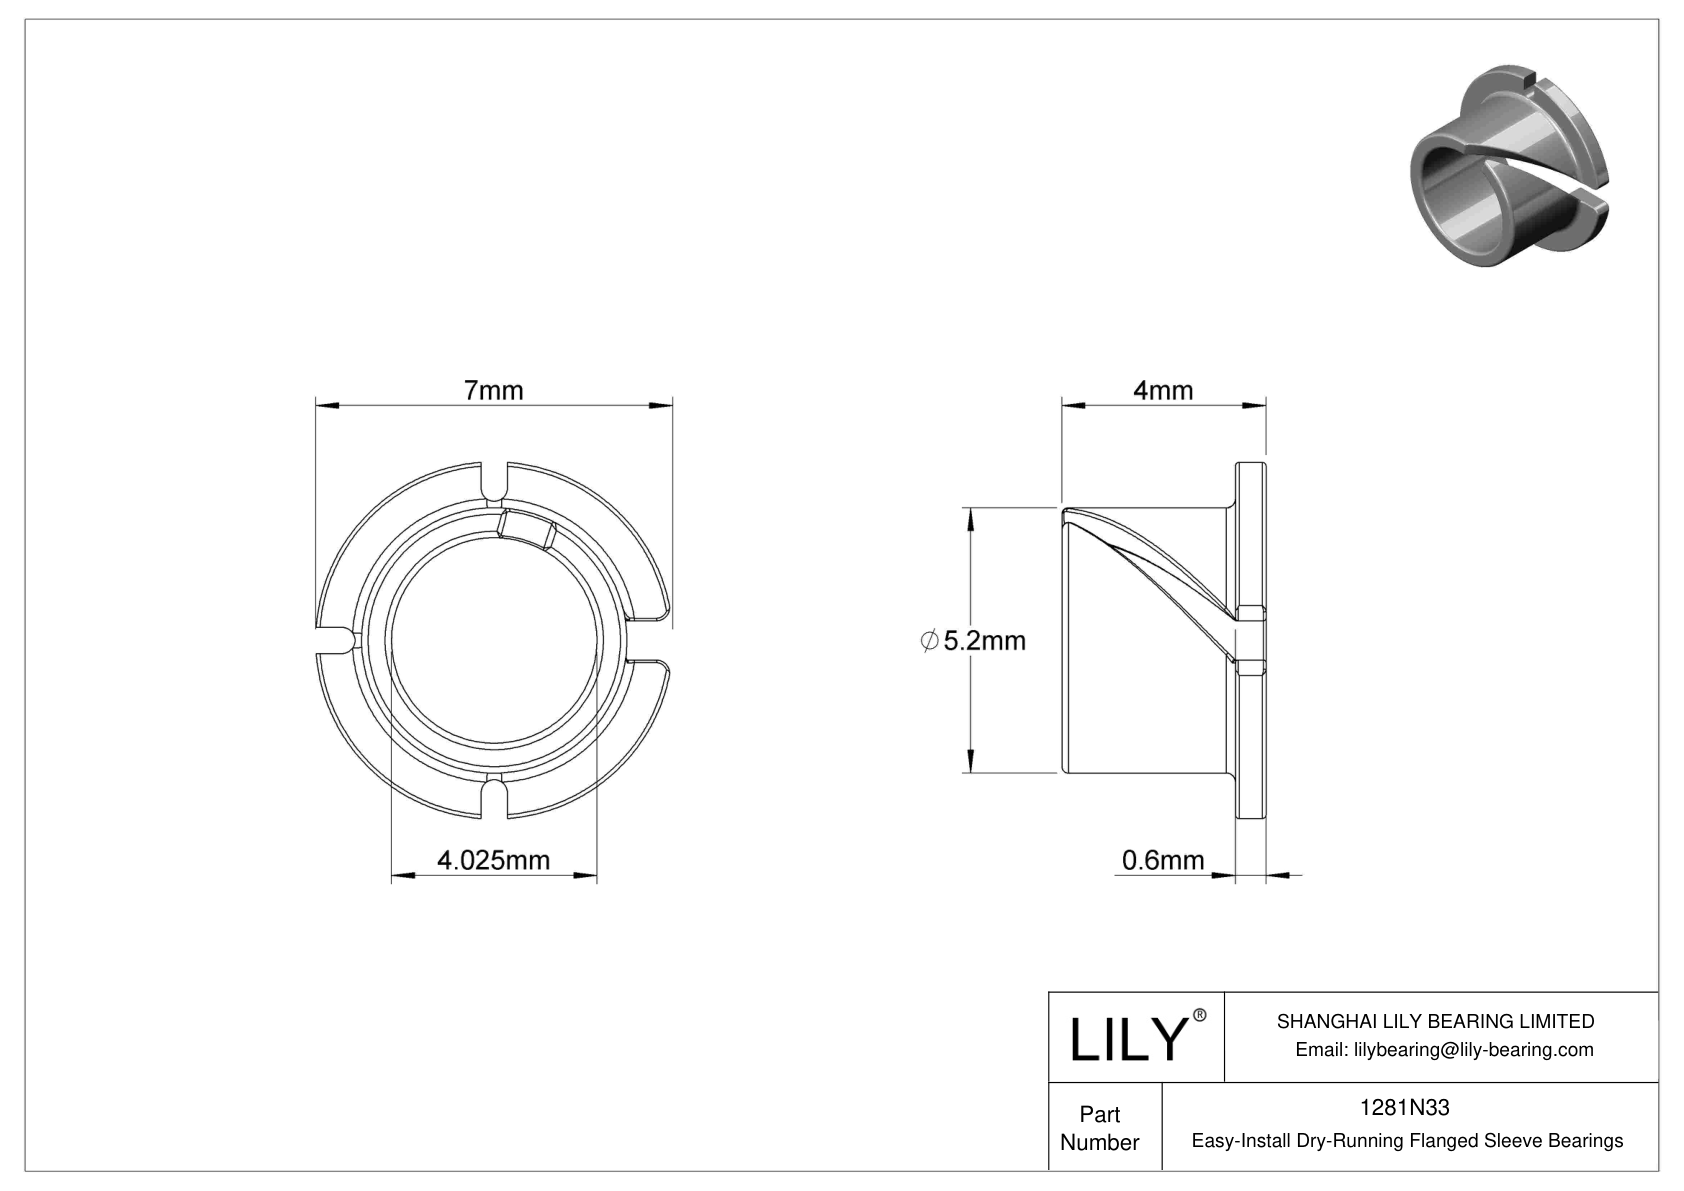 BCIBNDD Easy-Install Dry-Running Flanged Sleeve Bearings cad drawing